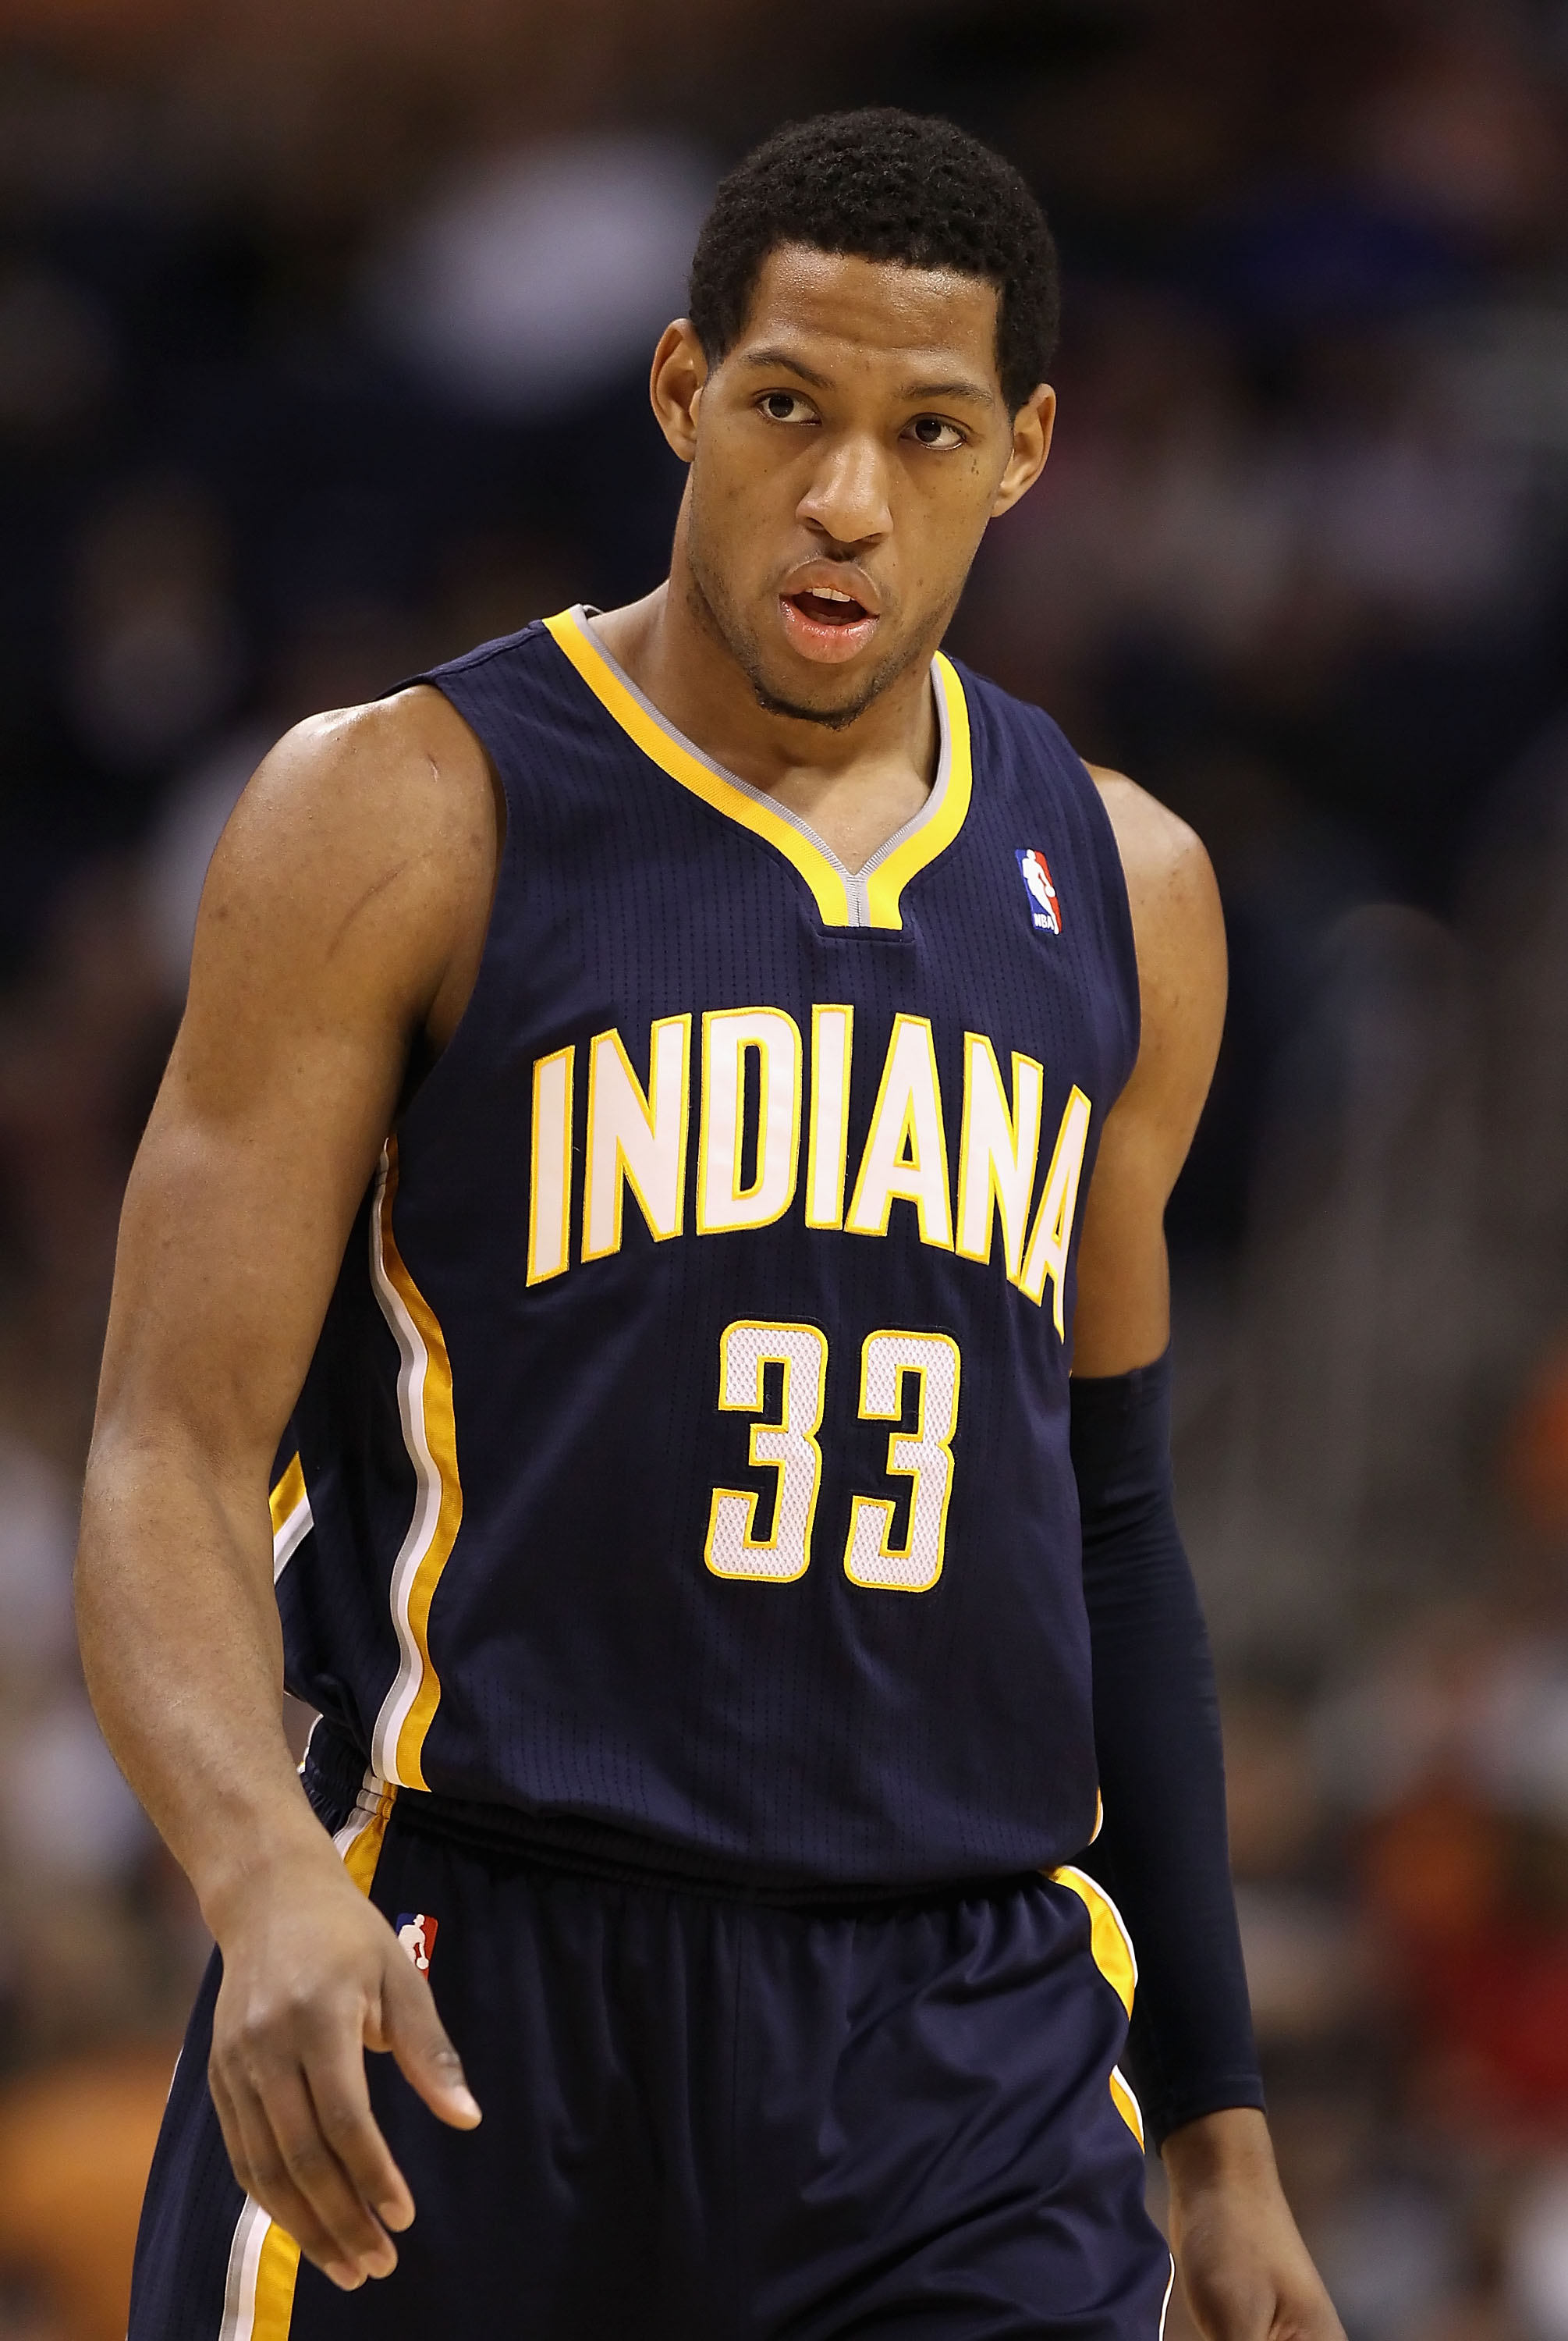 PHOENIX - DECEMBER 03:  Danny Granger #33 of the Indiana Pacers during the NBA game against the Phoenix Suns at US Airways Center on December 3, 2010 in Phoenix, Arizona.  The Suns defeated the Pacers 105-97.  NOTE TO USER: User expressly acknowledges and